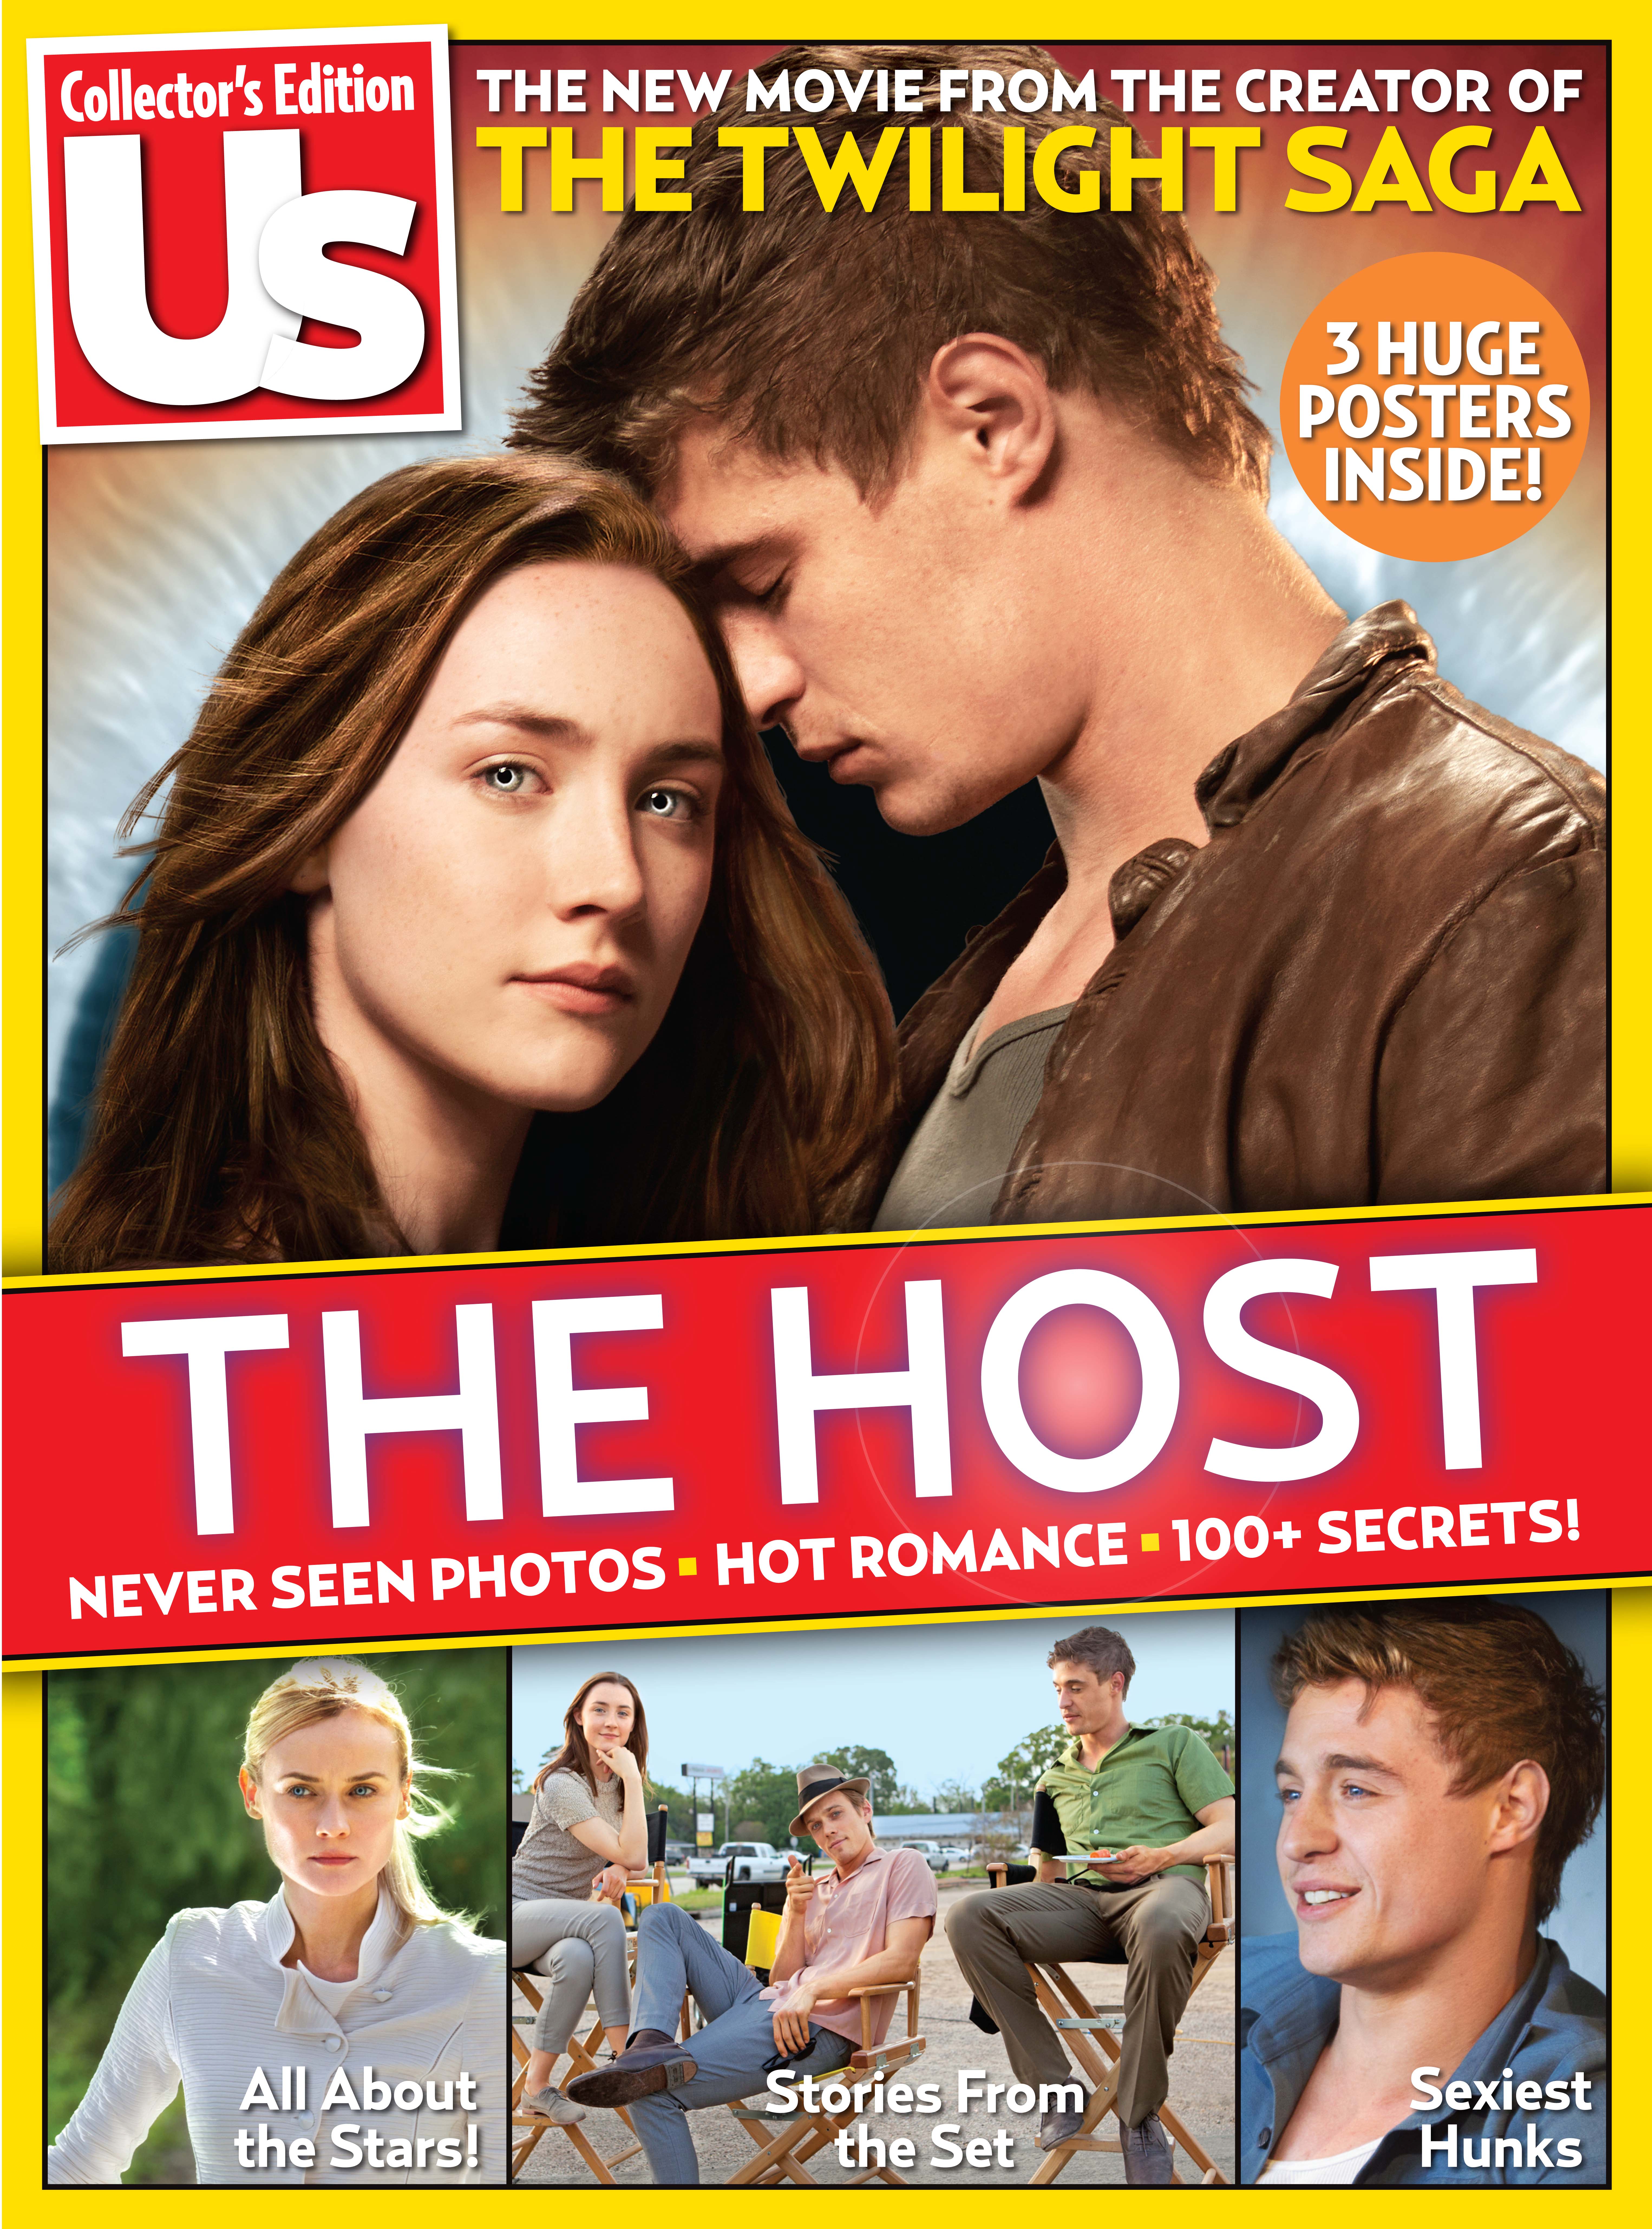 Us magazine. The host book. The host book Covers.